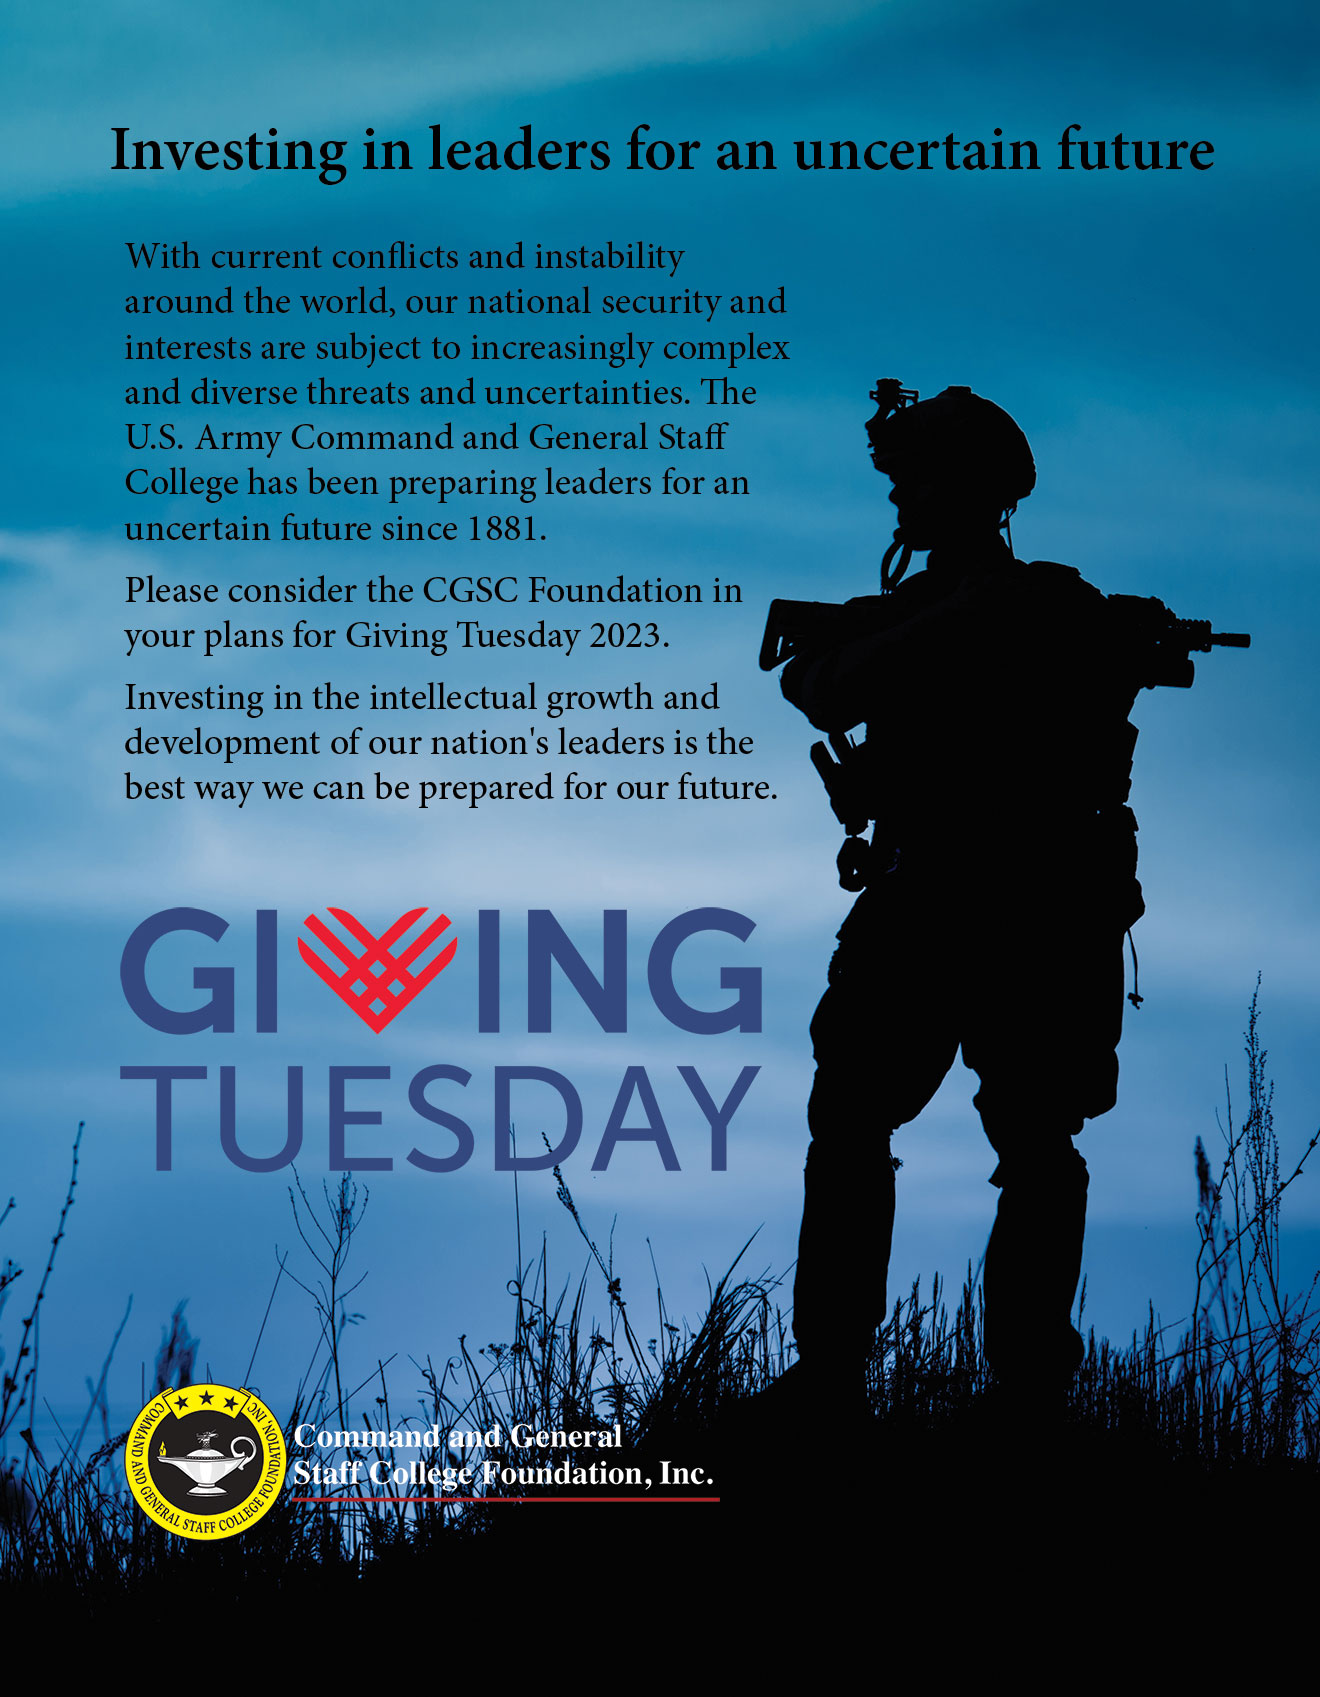 Giving Tuesday 2023 composite image - soldier silhouette with the Giving Tuesday logo layered on top